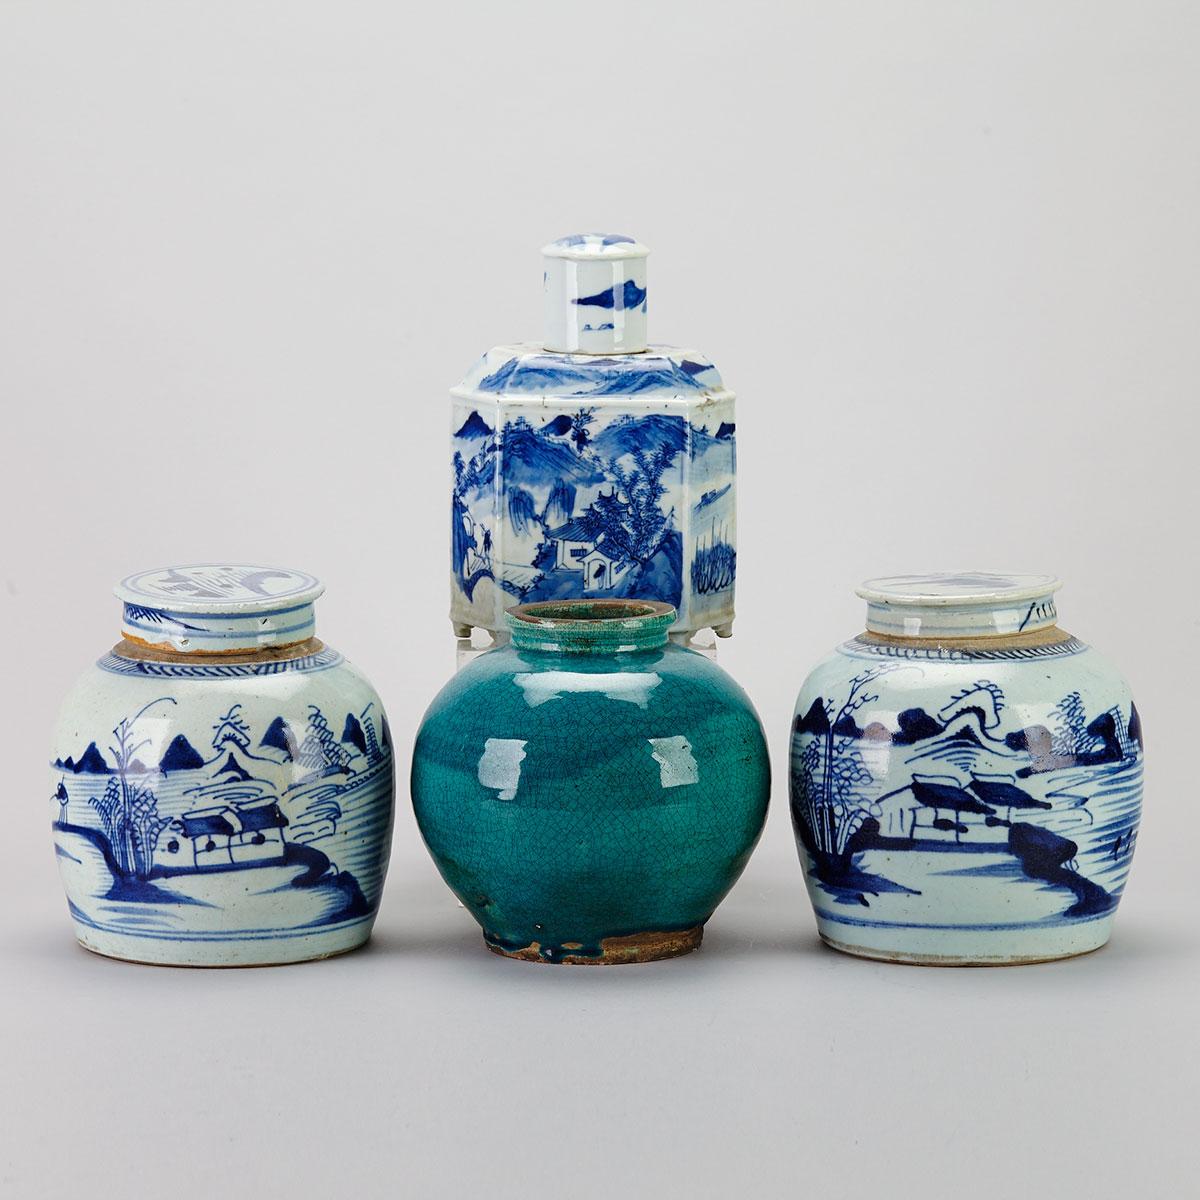 Three Export Blue and White Porcelain Wares, 18th/19th Century